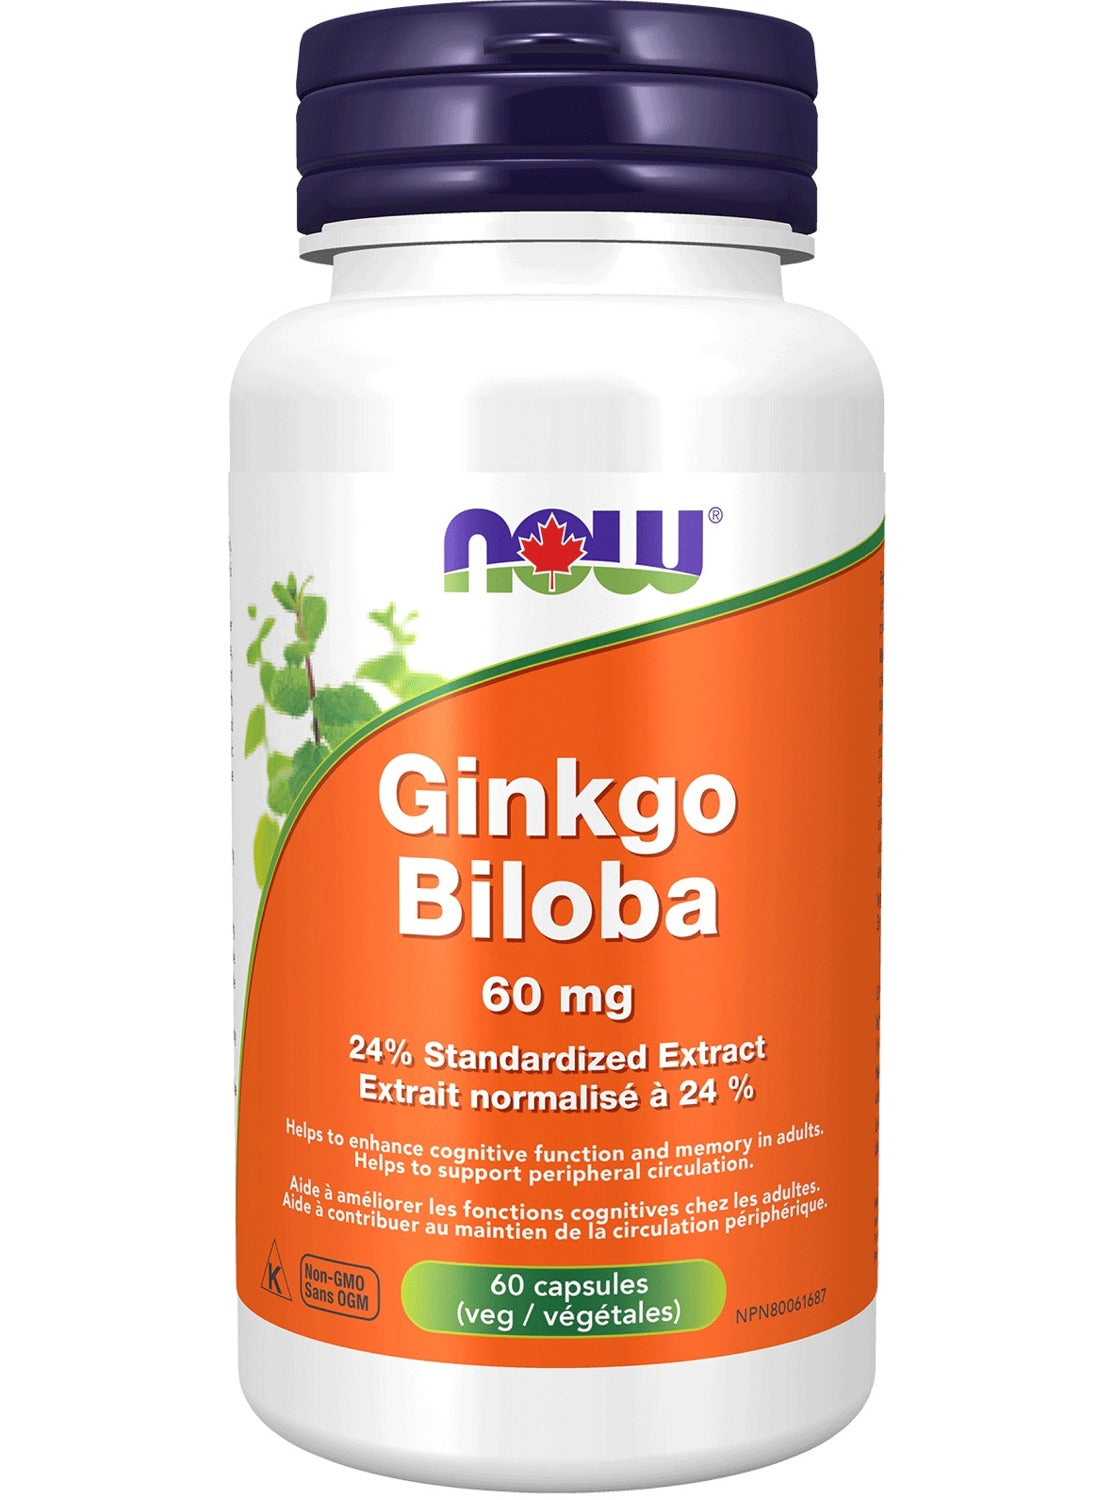 NOW Ginkgo Biloba Extract (60 mg - 120 vcaps)